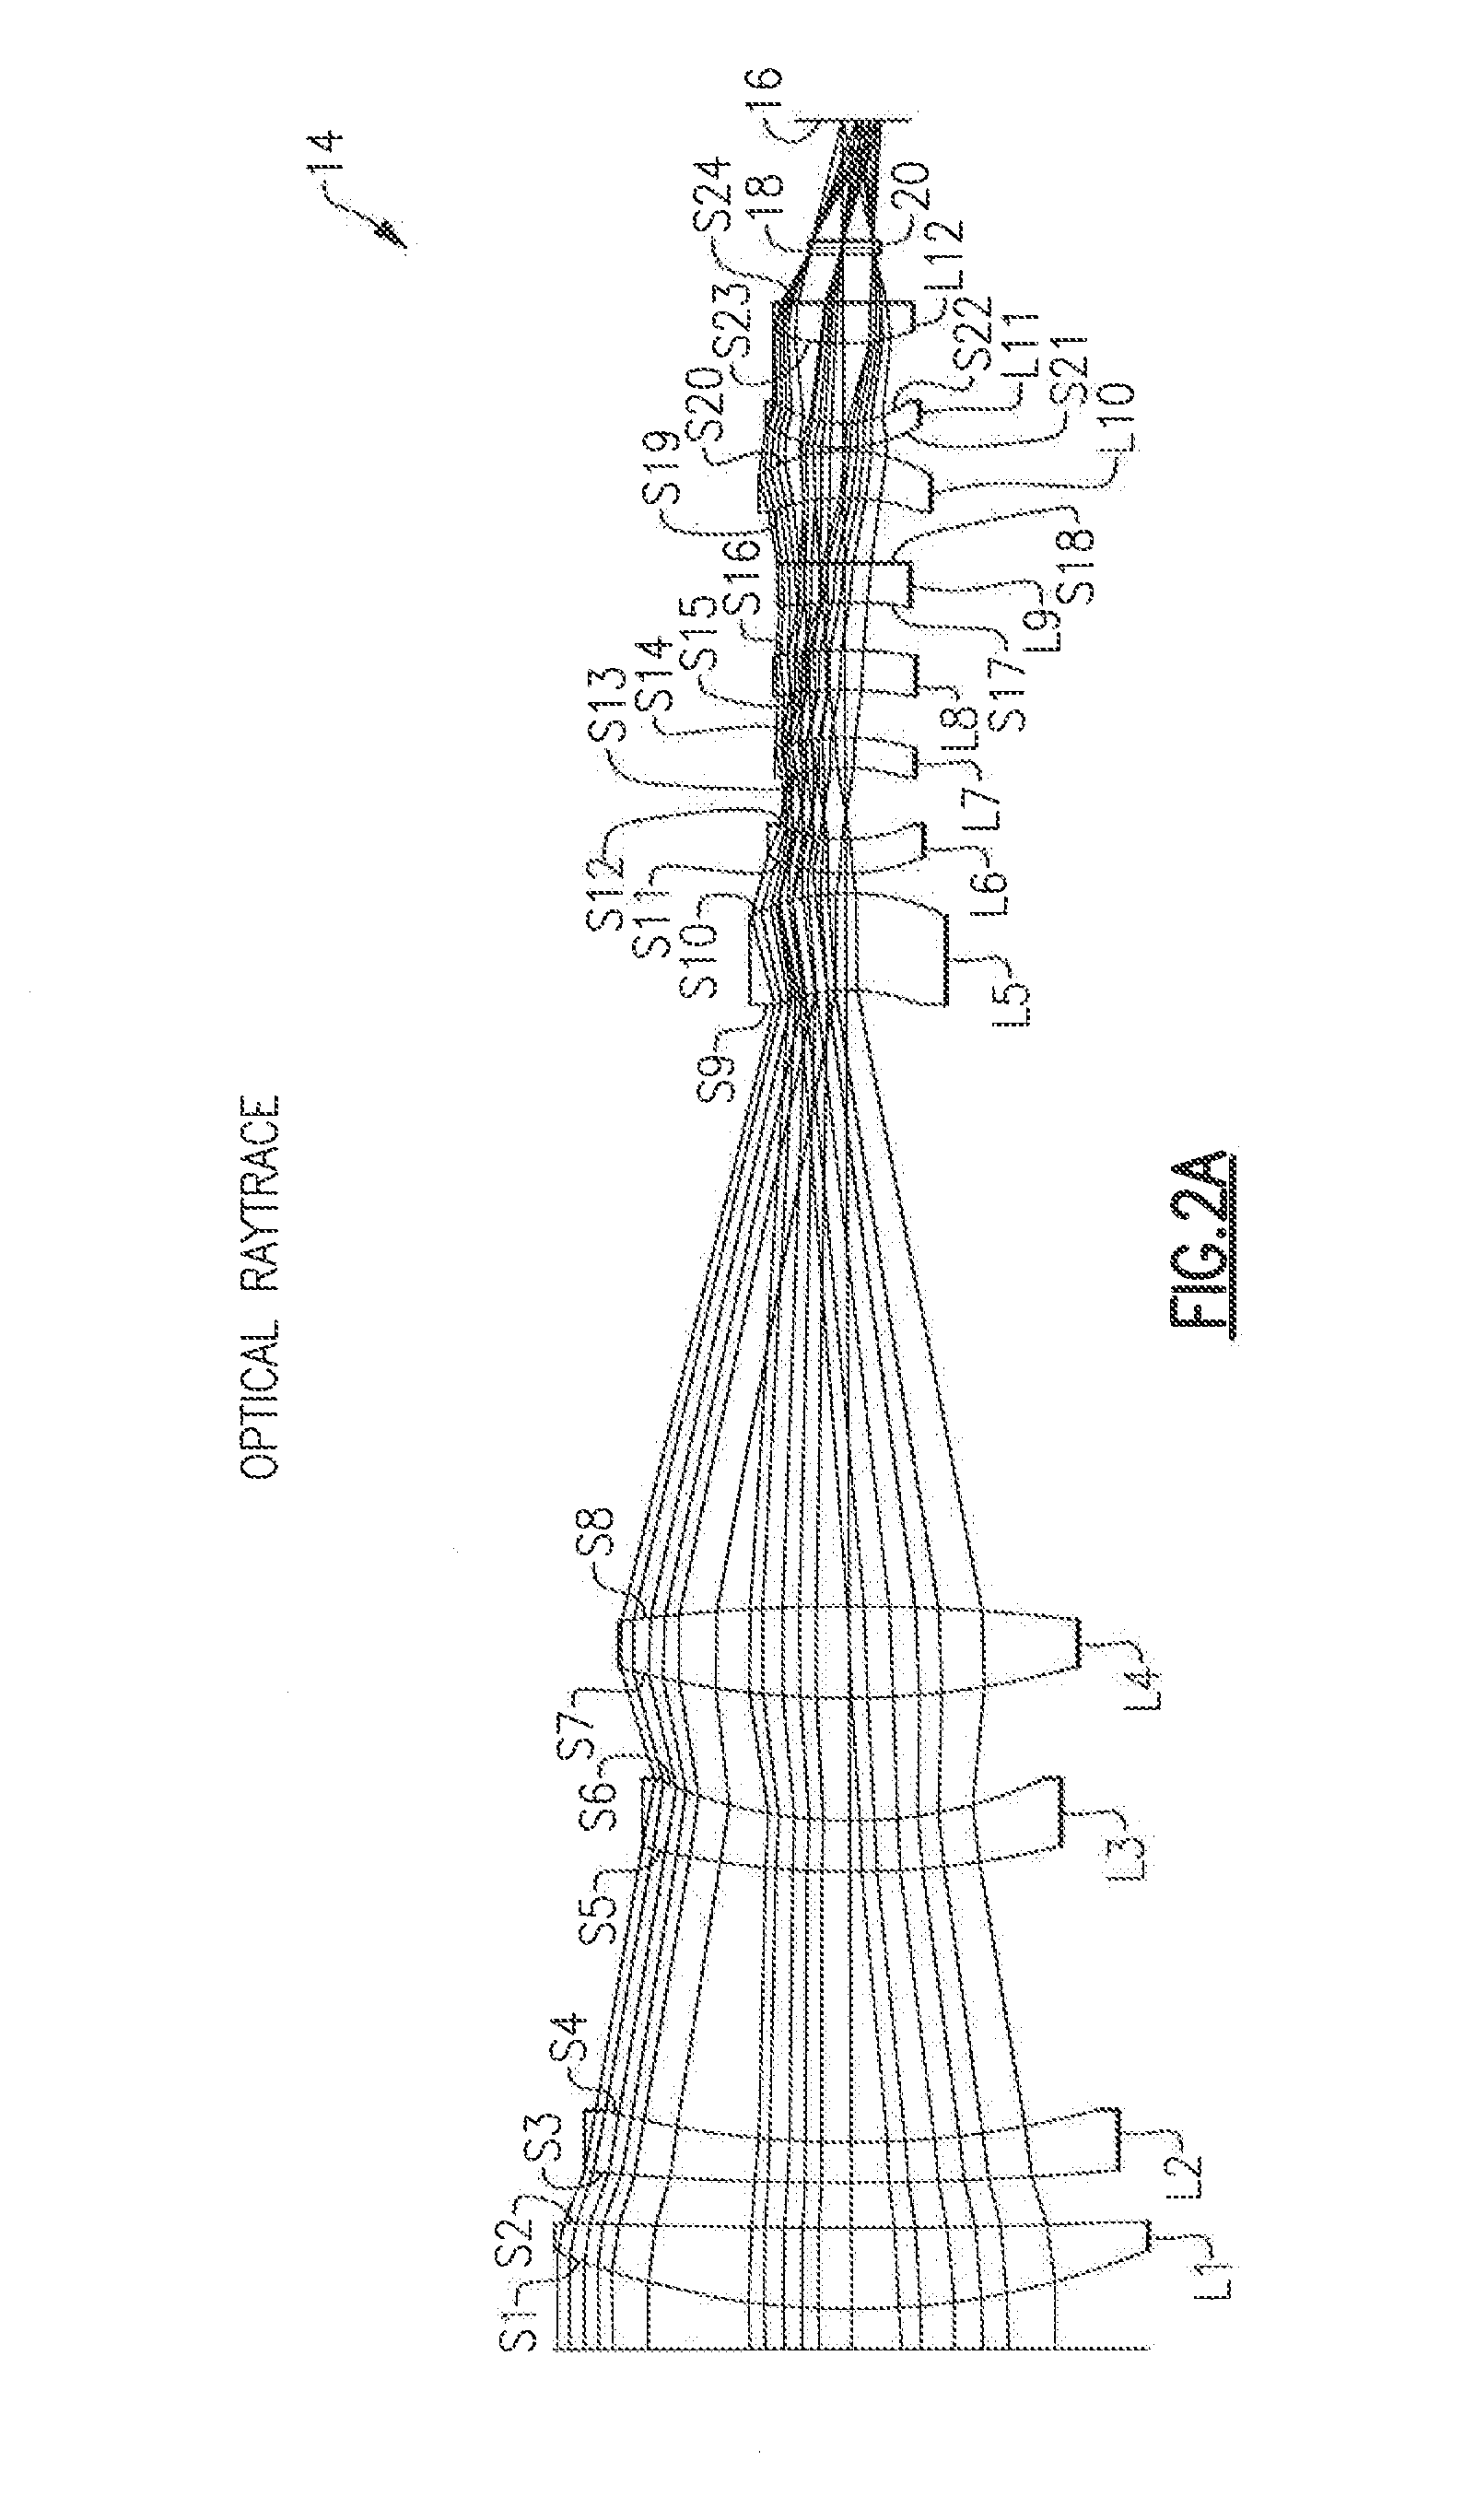 Dual-band passively athermal optical lens system